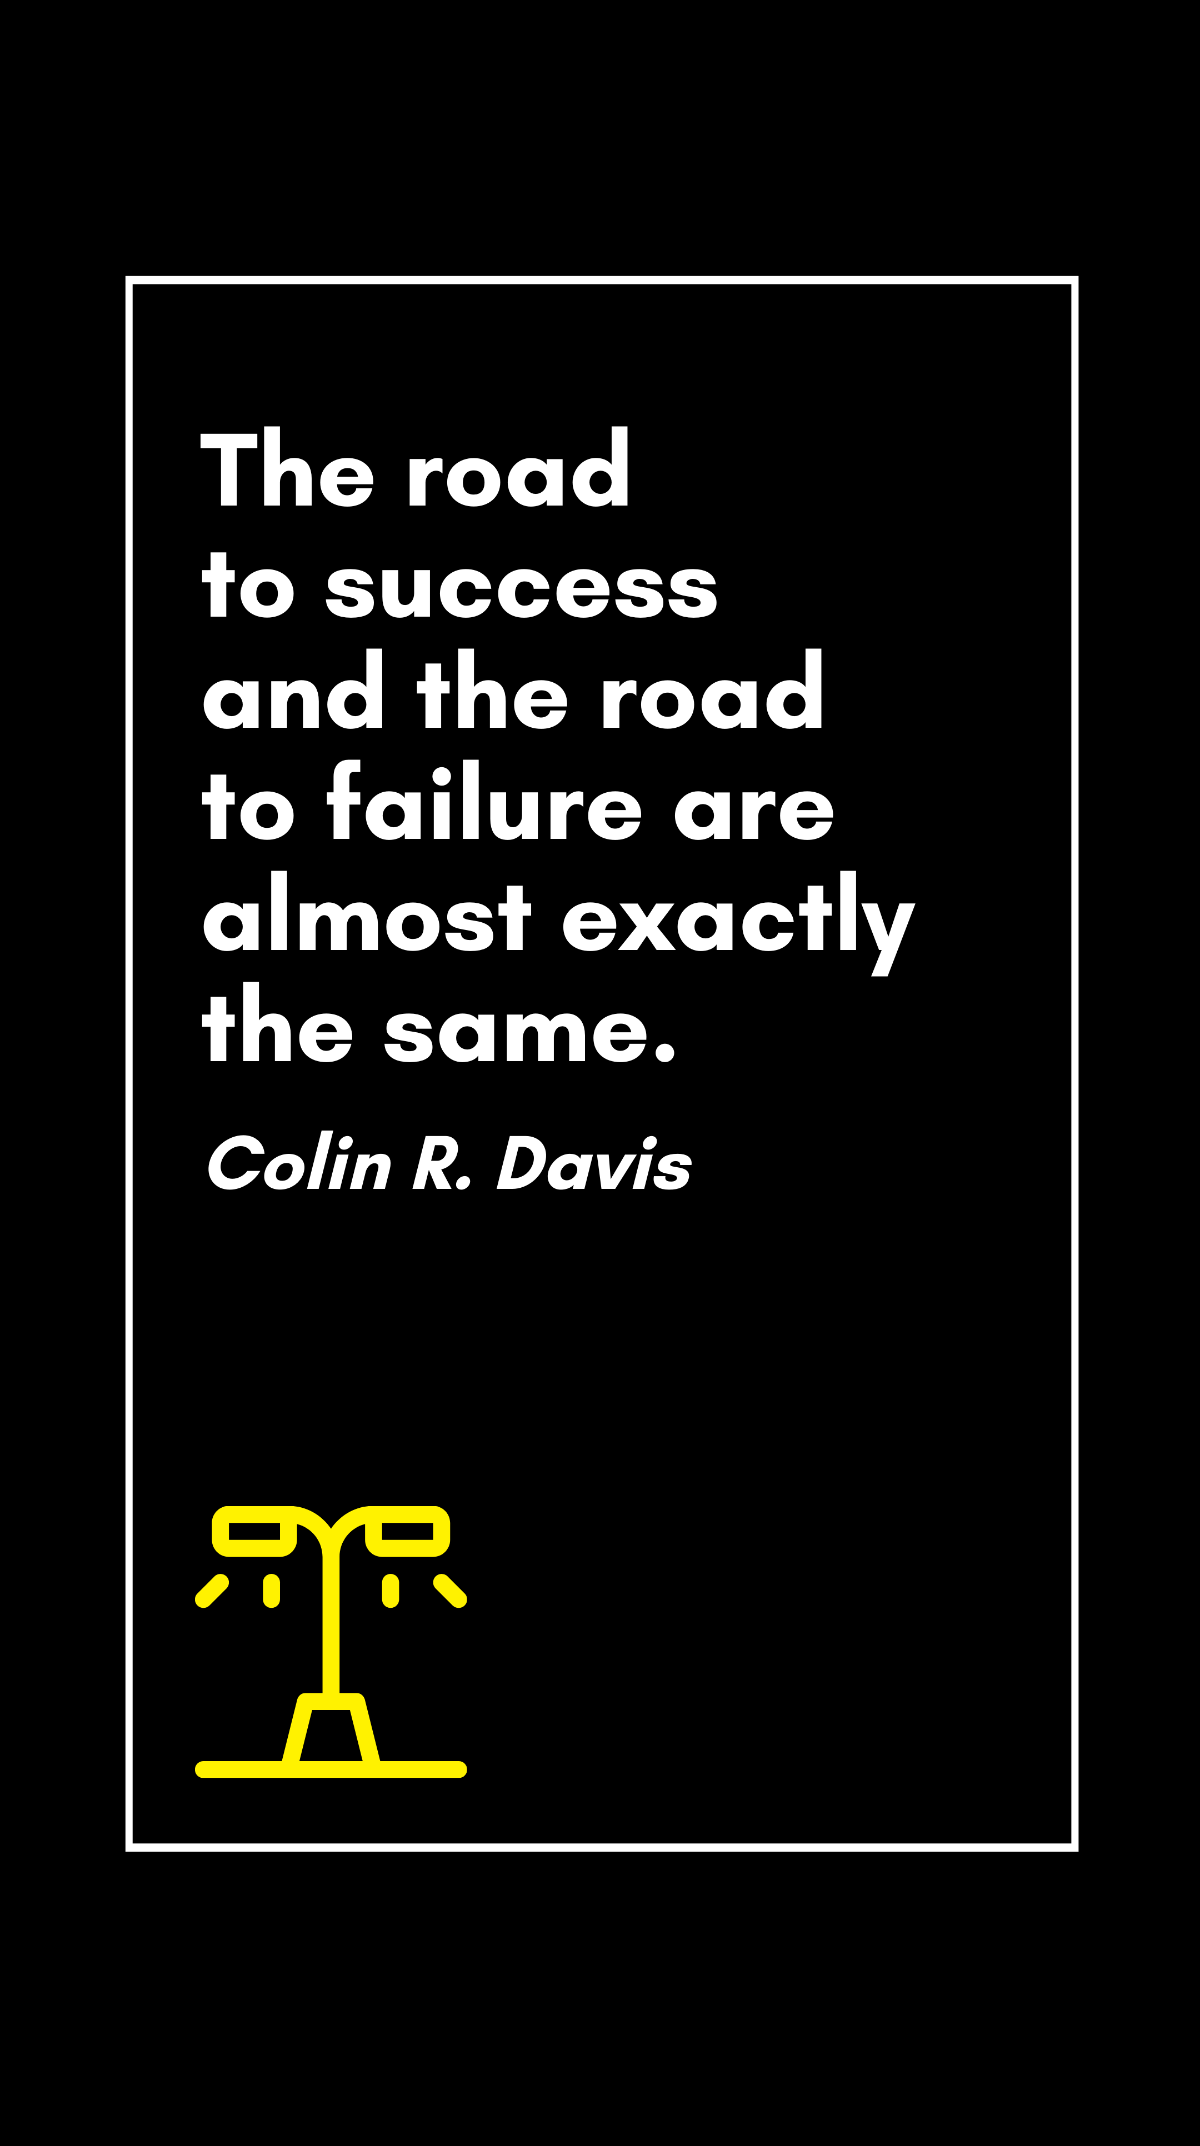 Colin R. Davis - The road to success and the road to failure are almost exactly the same.